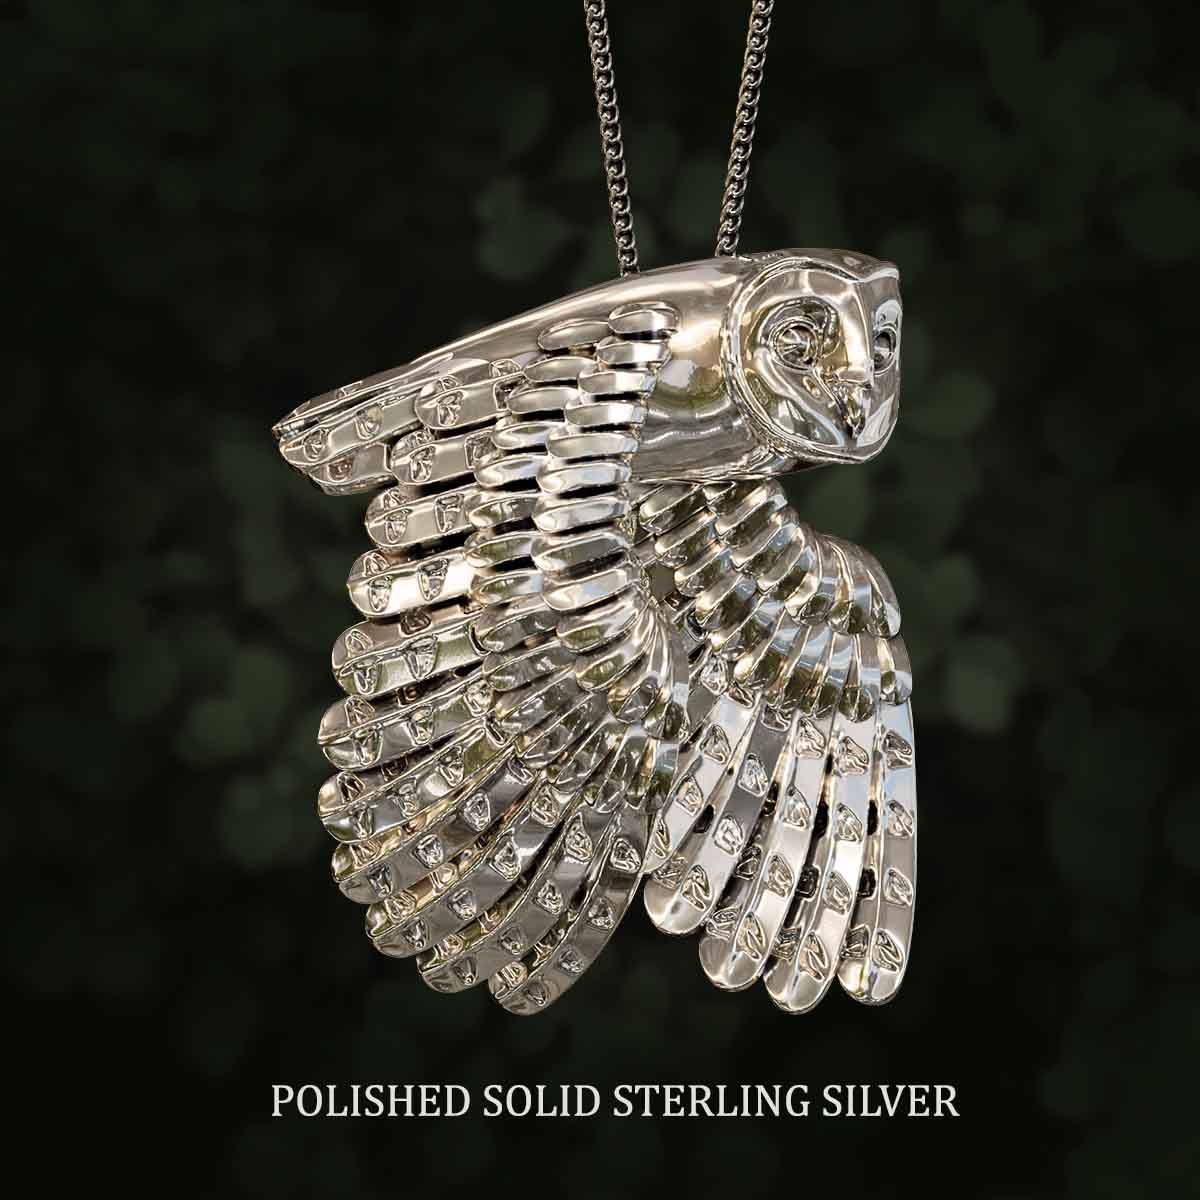 Polished-Solid-Sterling-Silver-Flying-Barn-Owl-Pendant-Jewelry-For-Necklace